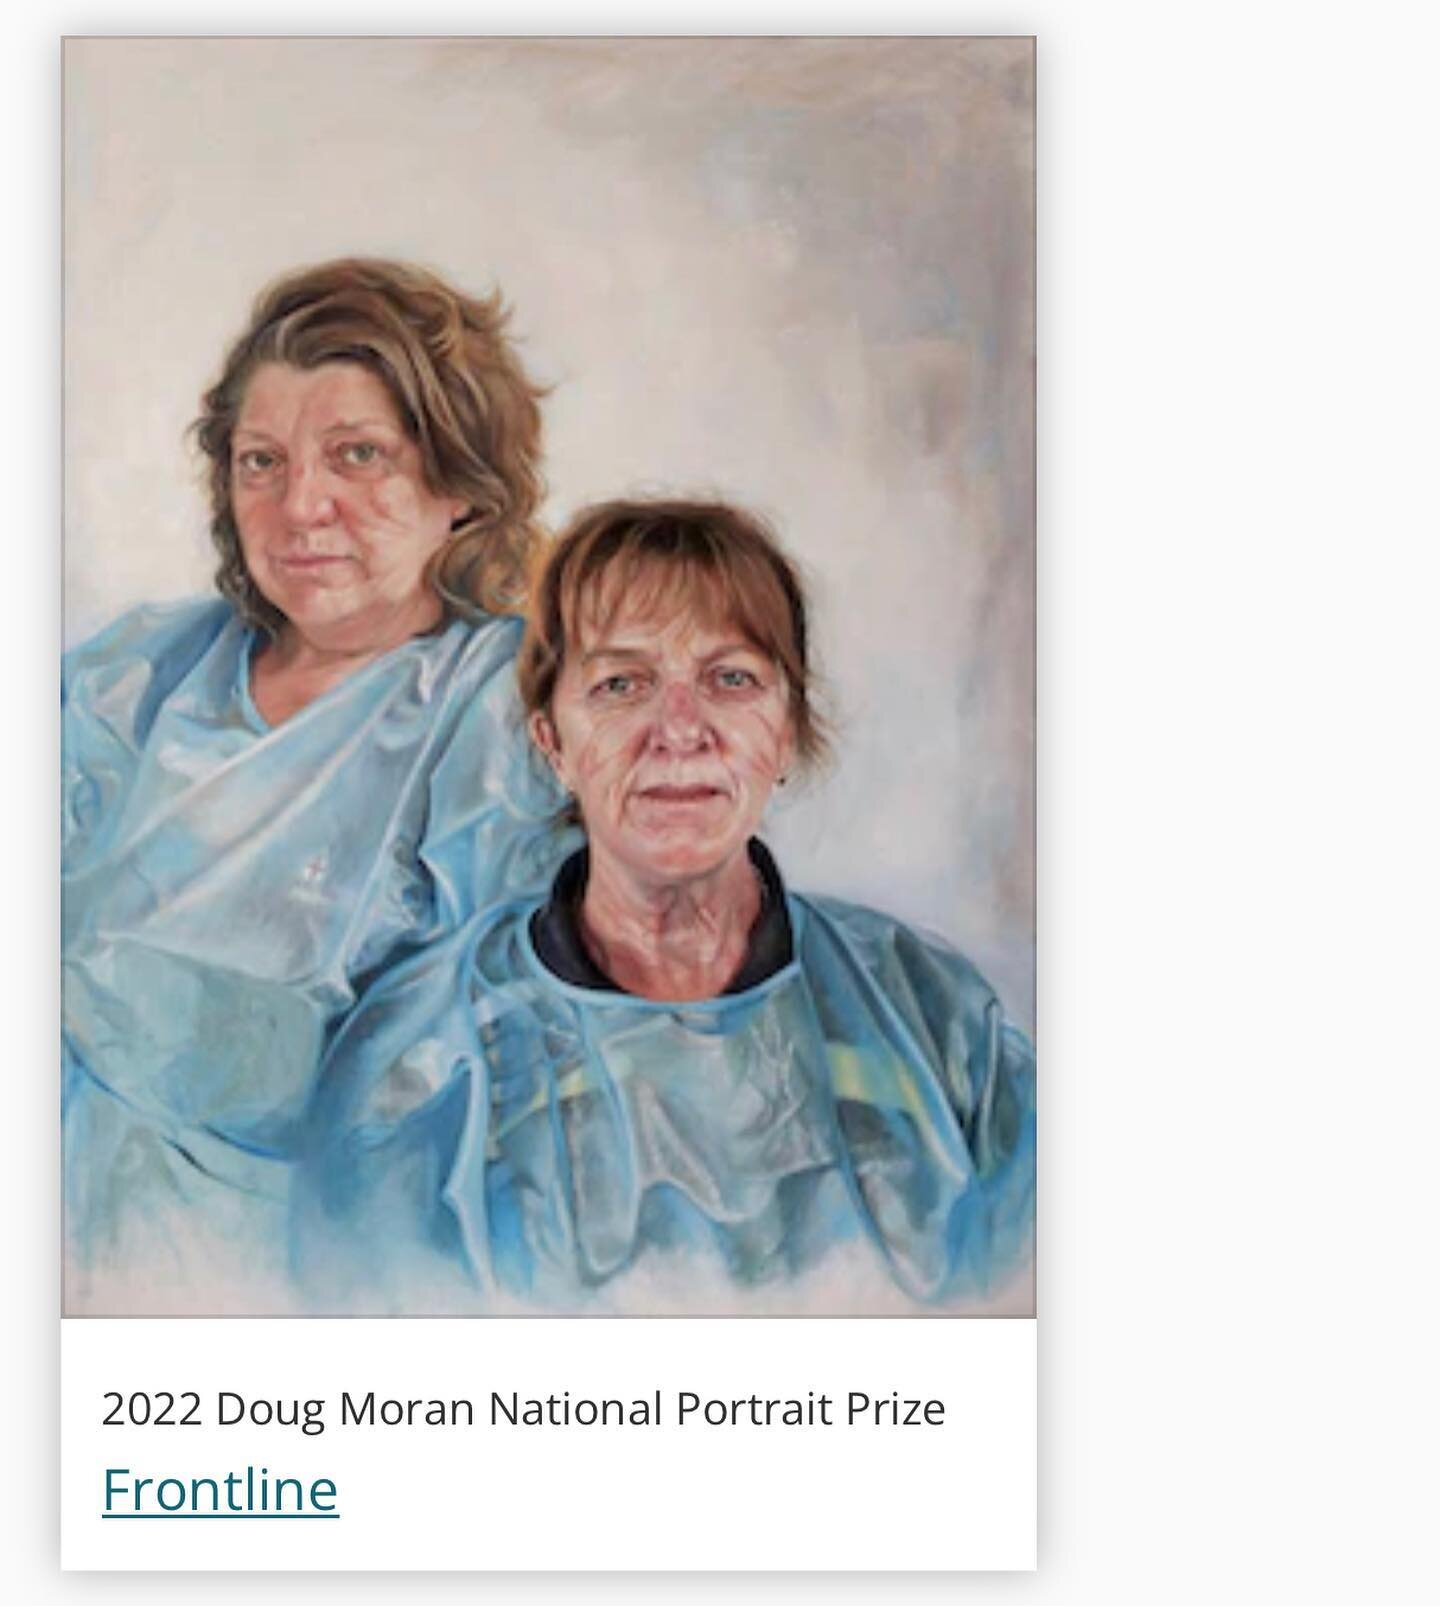 Delighted to be a semi-finalist in the 2022 Doug Moran Portrait Prize with my painting &lsquo;Frontline&rsquo;, featuring Clinical nurses Ange and Trish Kelly. Congratulations and good luck to the other semi-finalists! Finalists announced Nov 3rd. 

